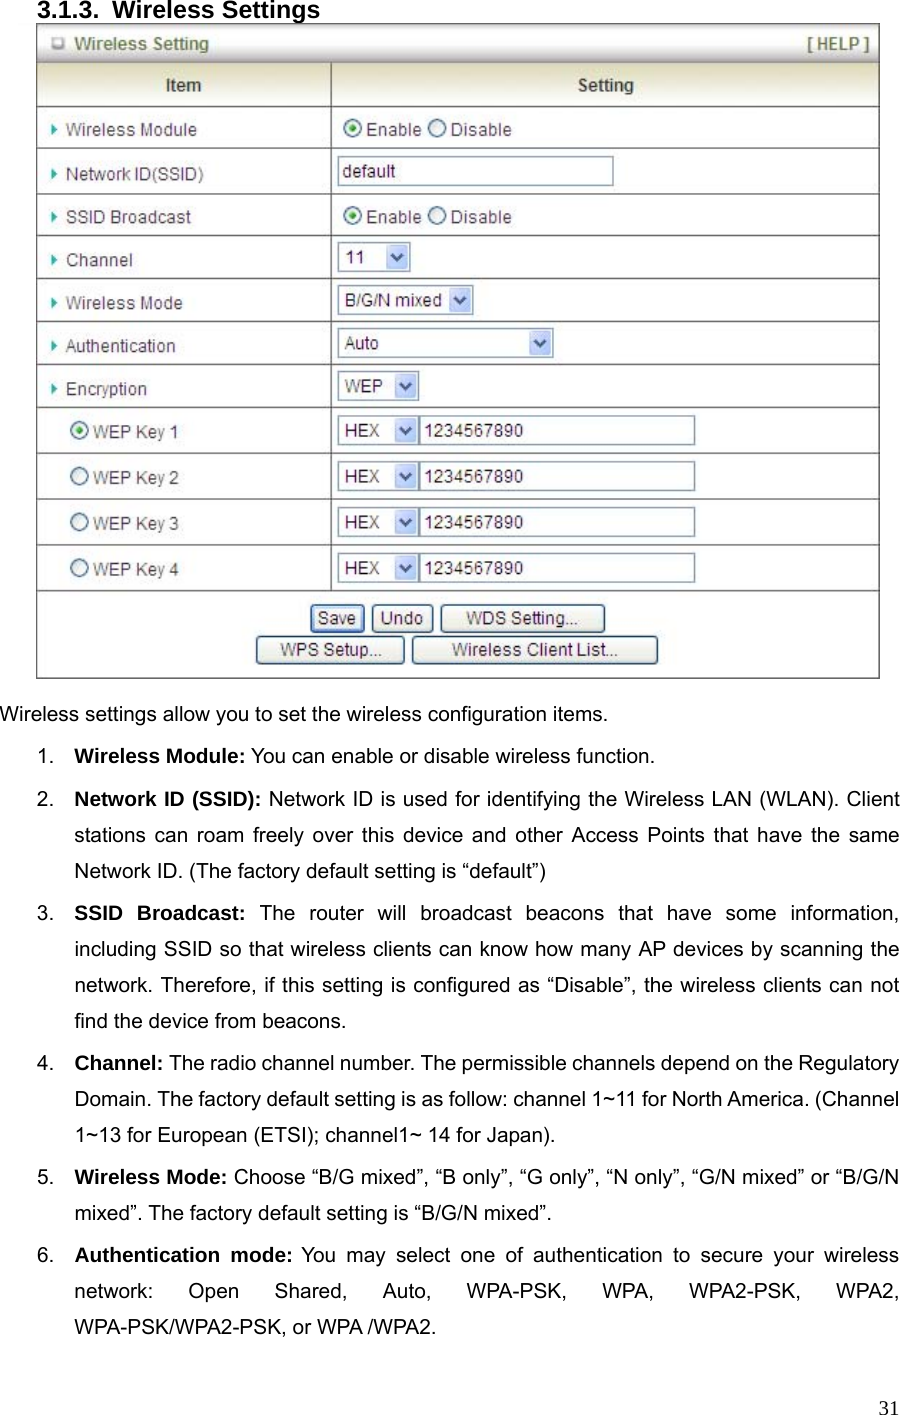  313.1.3. Wireless Settings   Wireless settings allow you to set the wireless configuration items. 1.  Wireless Module: You can enable or disable wireless function. 2.  Network ID (SSID): Network ID is used for identifying the Wireless LAN (WLAN). Client stations can roam freely over this device and other Access Points that have the same Network ID. (The factory default setting is “default”) 3.  SSID Broadcast: The router will broadcast beacons that have some information, including SSID so that wireless clients can know how many AP devices by scanning the network. Therefore, if this setting is configured as “Disable”, the wireless clients can not find the device from beacons. 4.  Channel: The radio channel number. The permissible channels depend on the Regulatory Domain. The factory default setting is as follow: channel 1~11 for North America. (Channel 1~13 for European (ETSI); channel1~ 14 for Japan). 5.  Wireless Mode: Choose “B/G mixed”, “B only”, “G only”, “N only”, “G/N mixed” or “B/G/N mixed”. The factory default setting is “B/G/N mixed”. 6.  Authentication mode: You may select one of authentication to secure your wireless network: Open Shared, Auto, WPA-PSK, WPA, WPA2-PSK, WPA2, WPA-PSK/WPA2-PSK, or WPA /WPA2. 